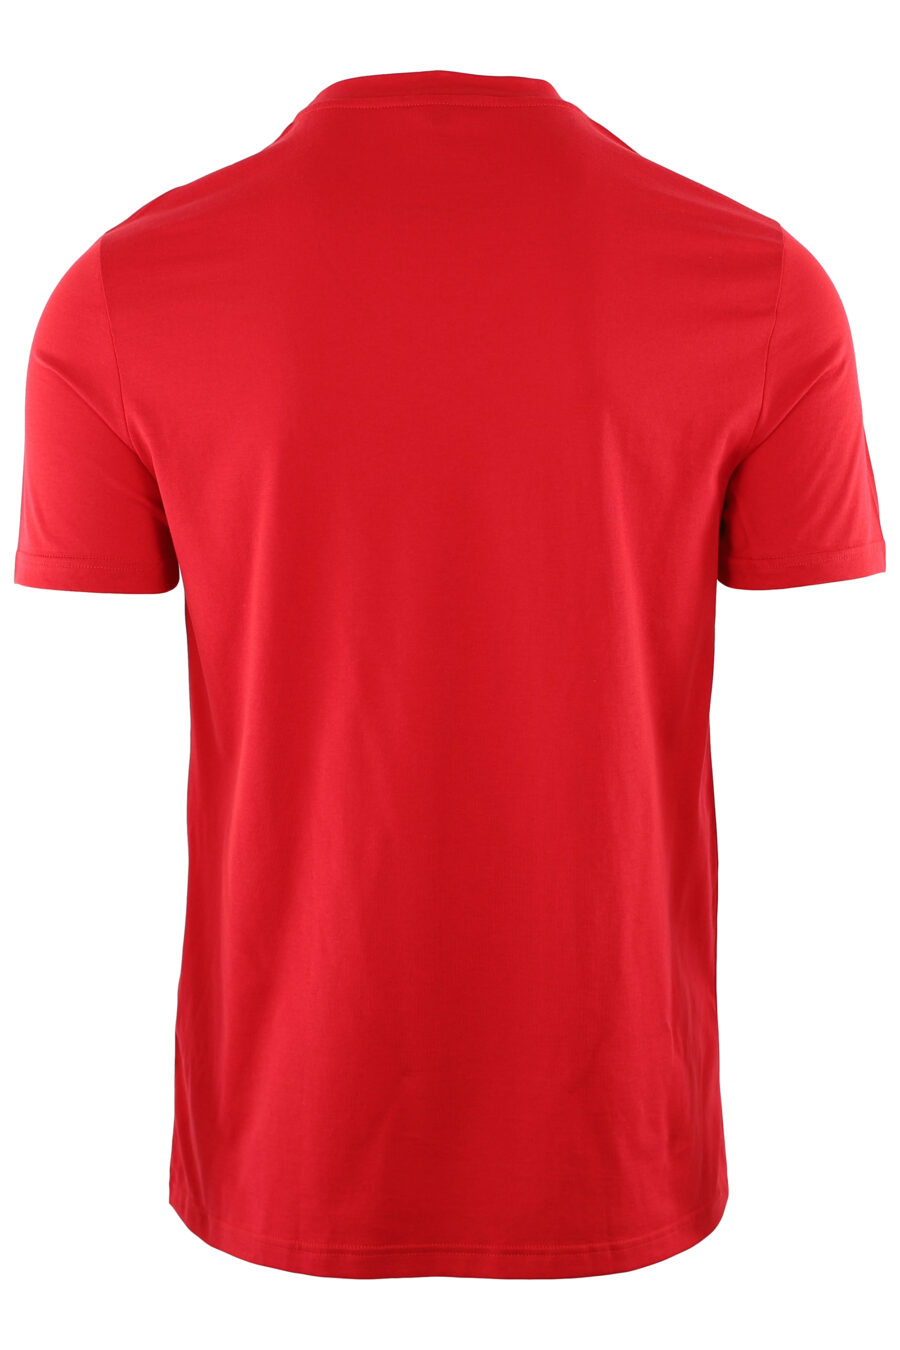 Red T-shirt with white embroidered logo - IMG 7410